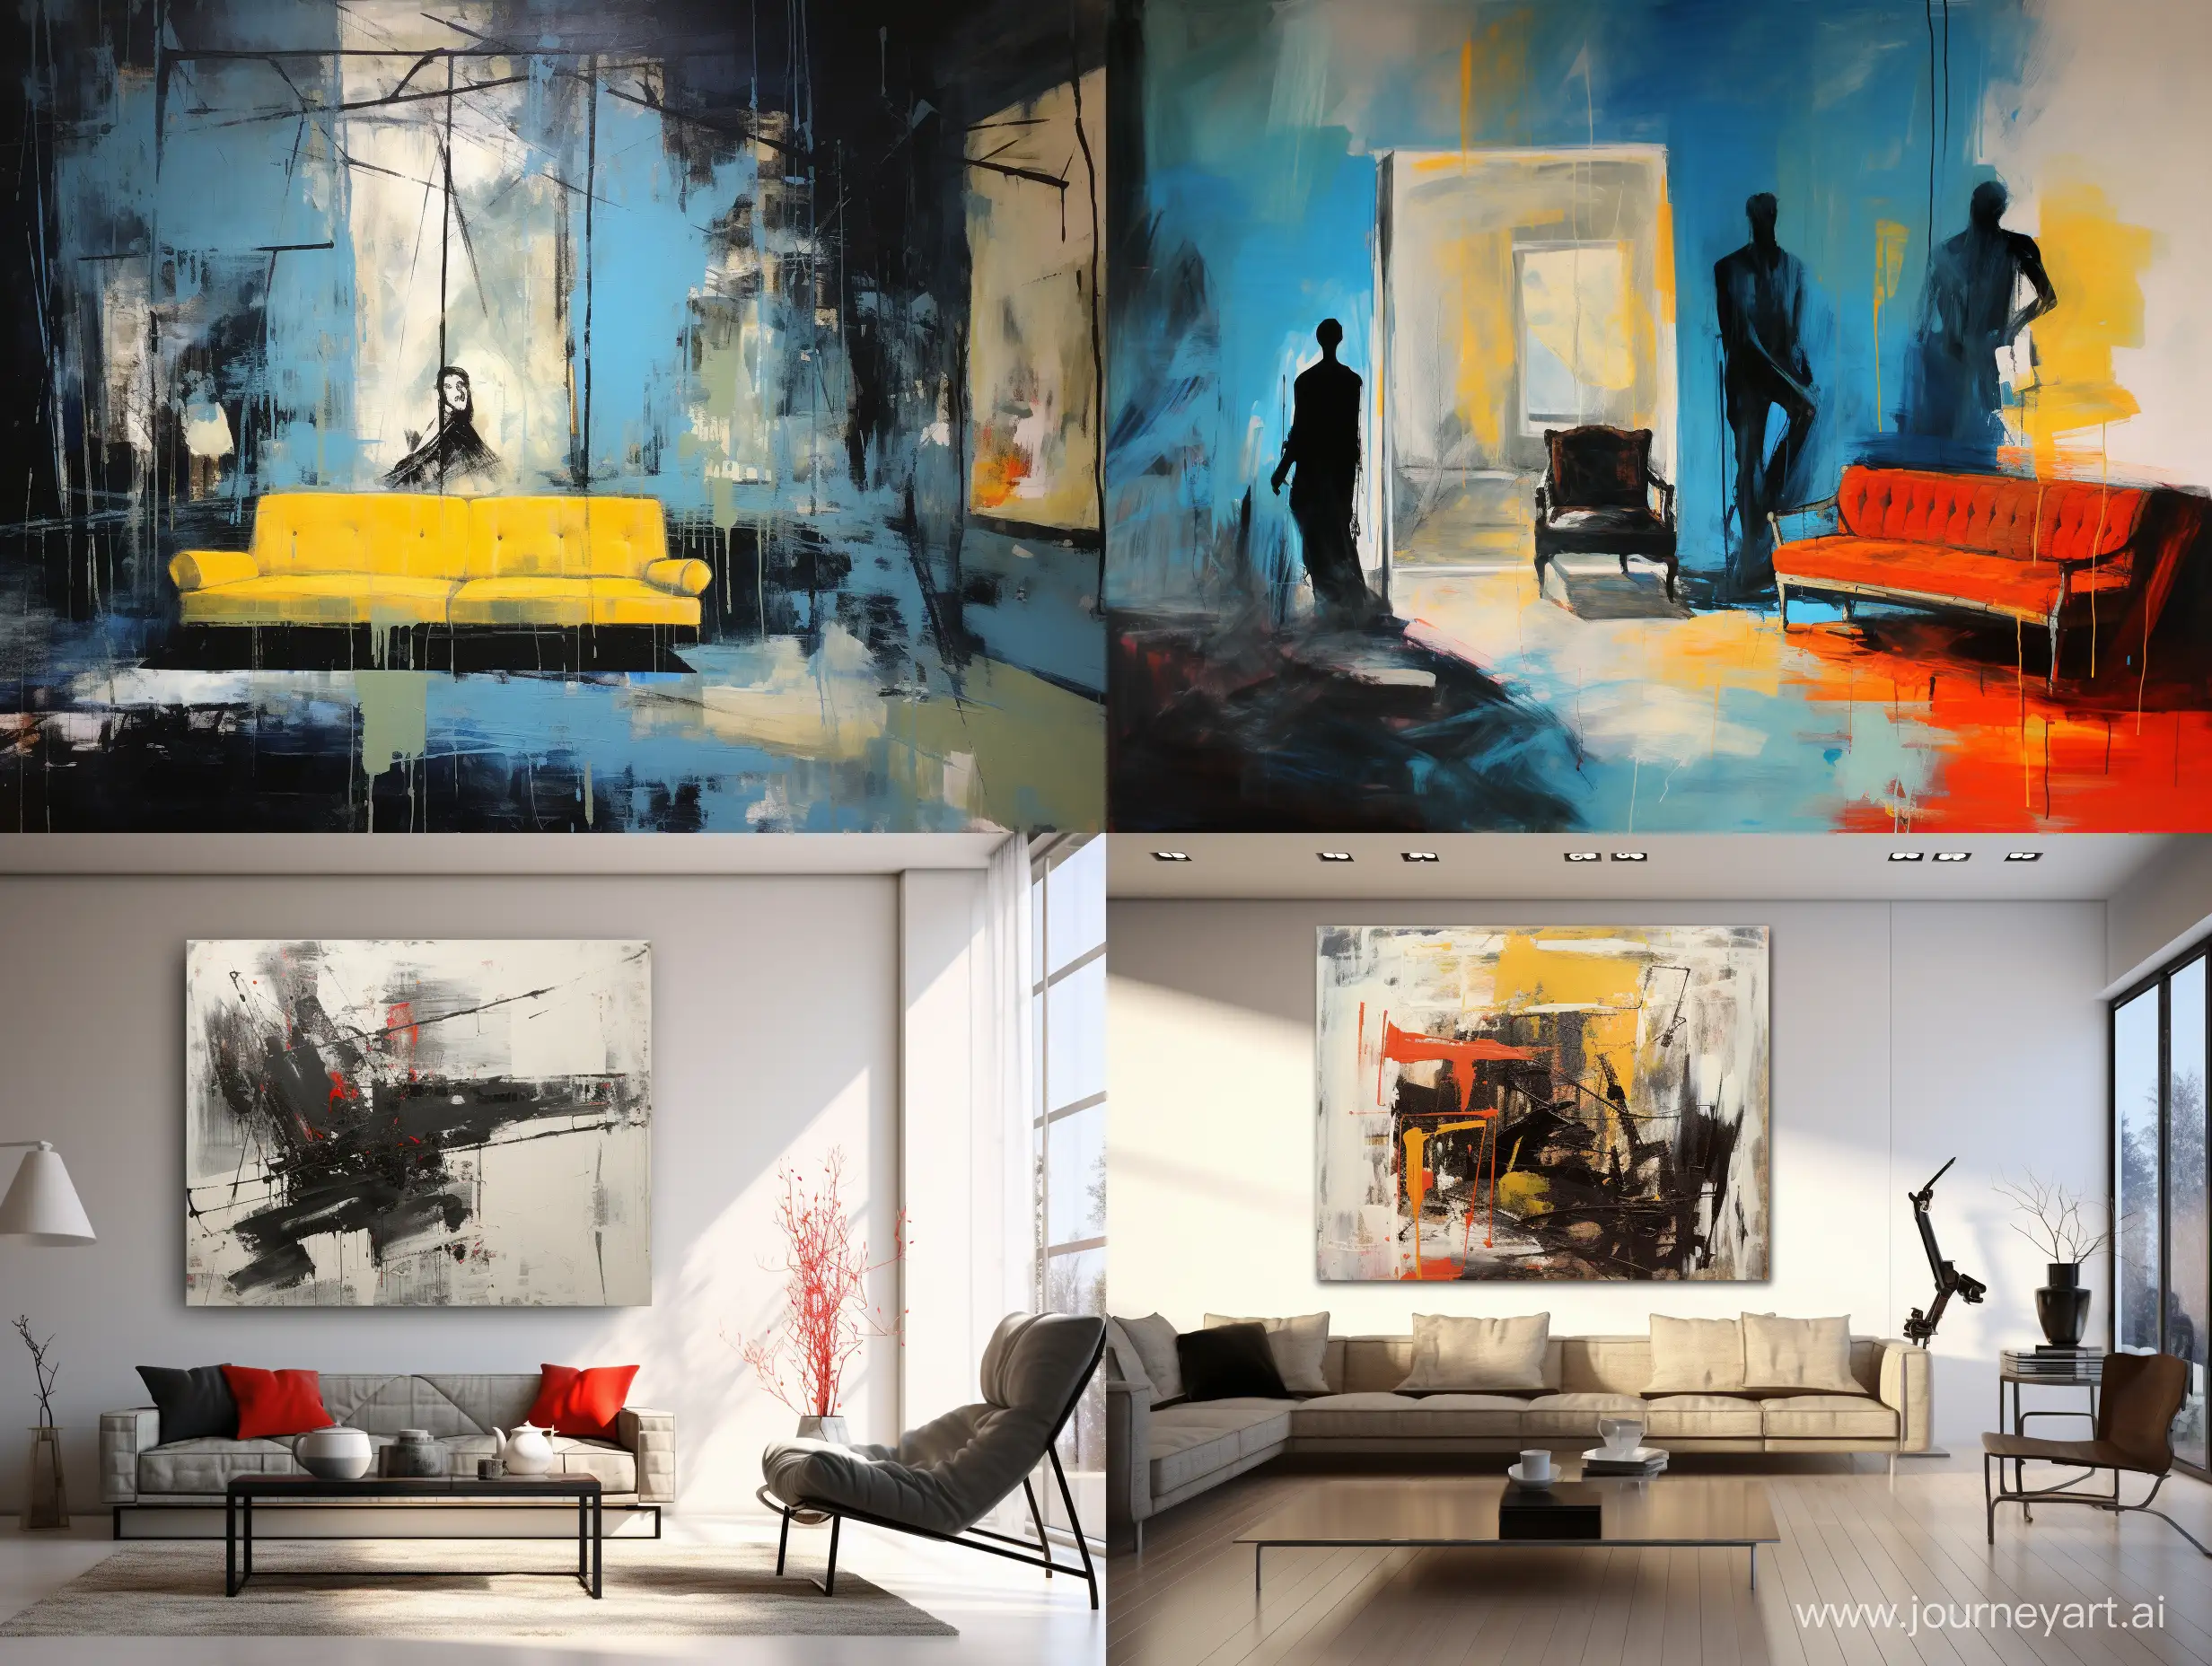 Vibrant-Abstraction-Expressive-Strokes-and-Ghostly-Silhouettes-in-a-Modern-Interior